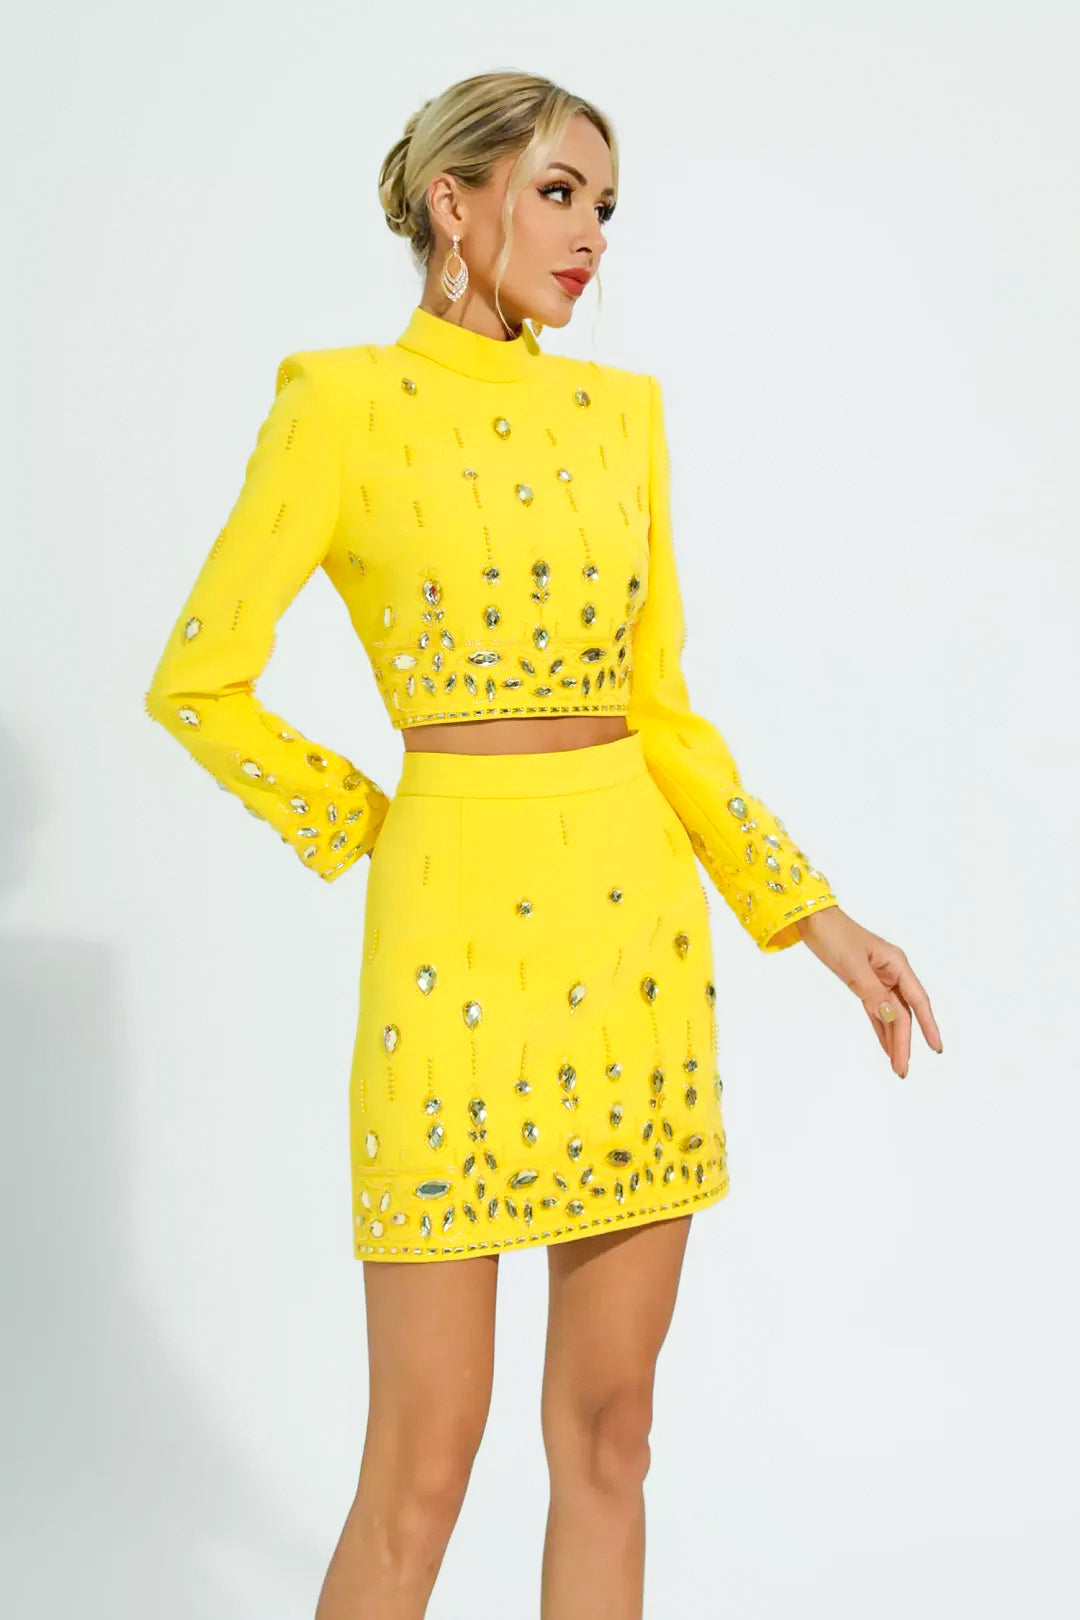 TINK TOP + SKIRT SET IN YELLOW